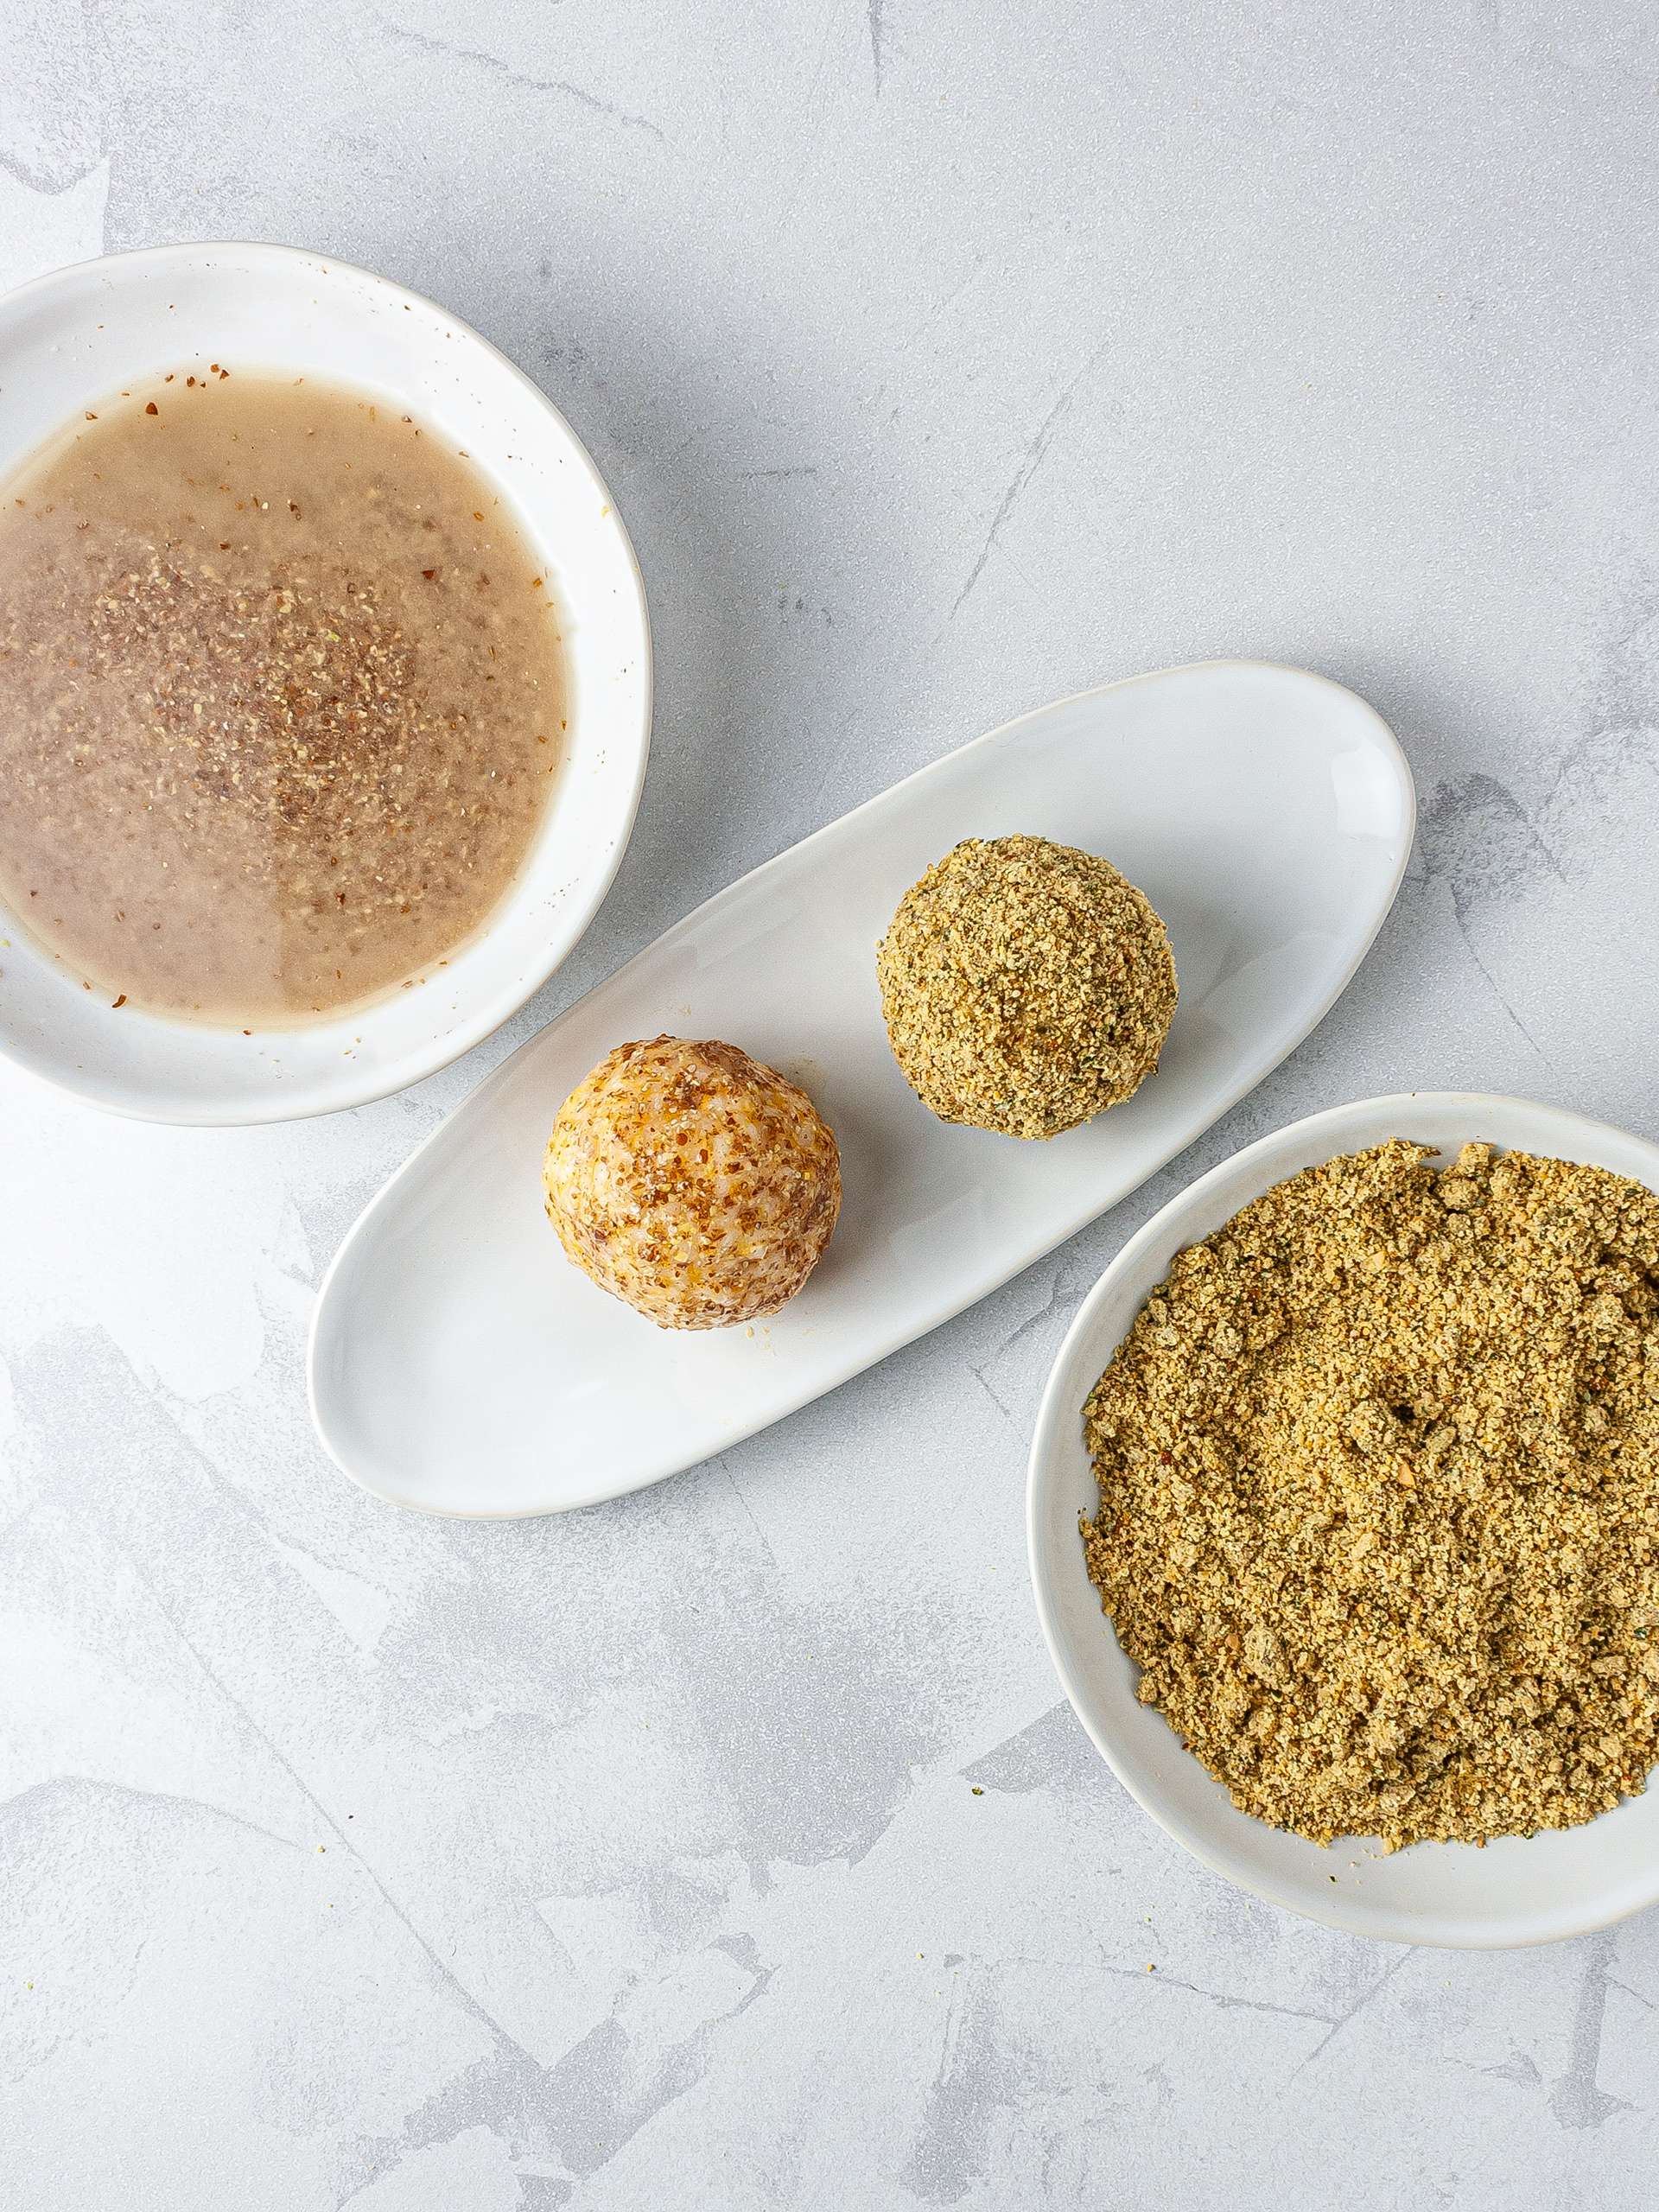 Rice balls coated in flax egg batter and then in gluten-free crumbs with nuts and seeds.